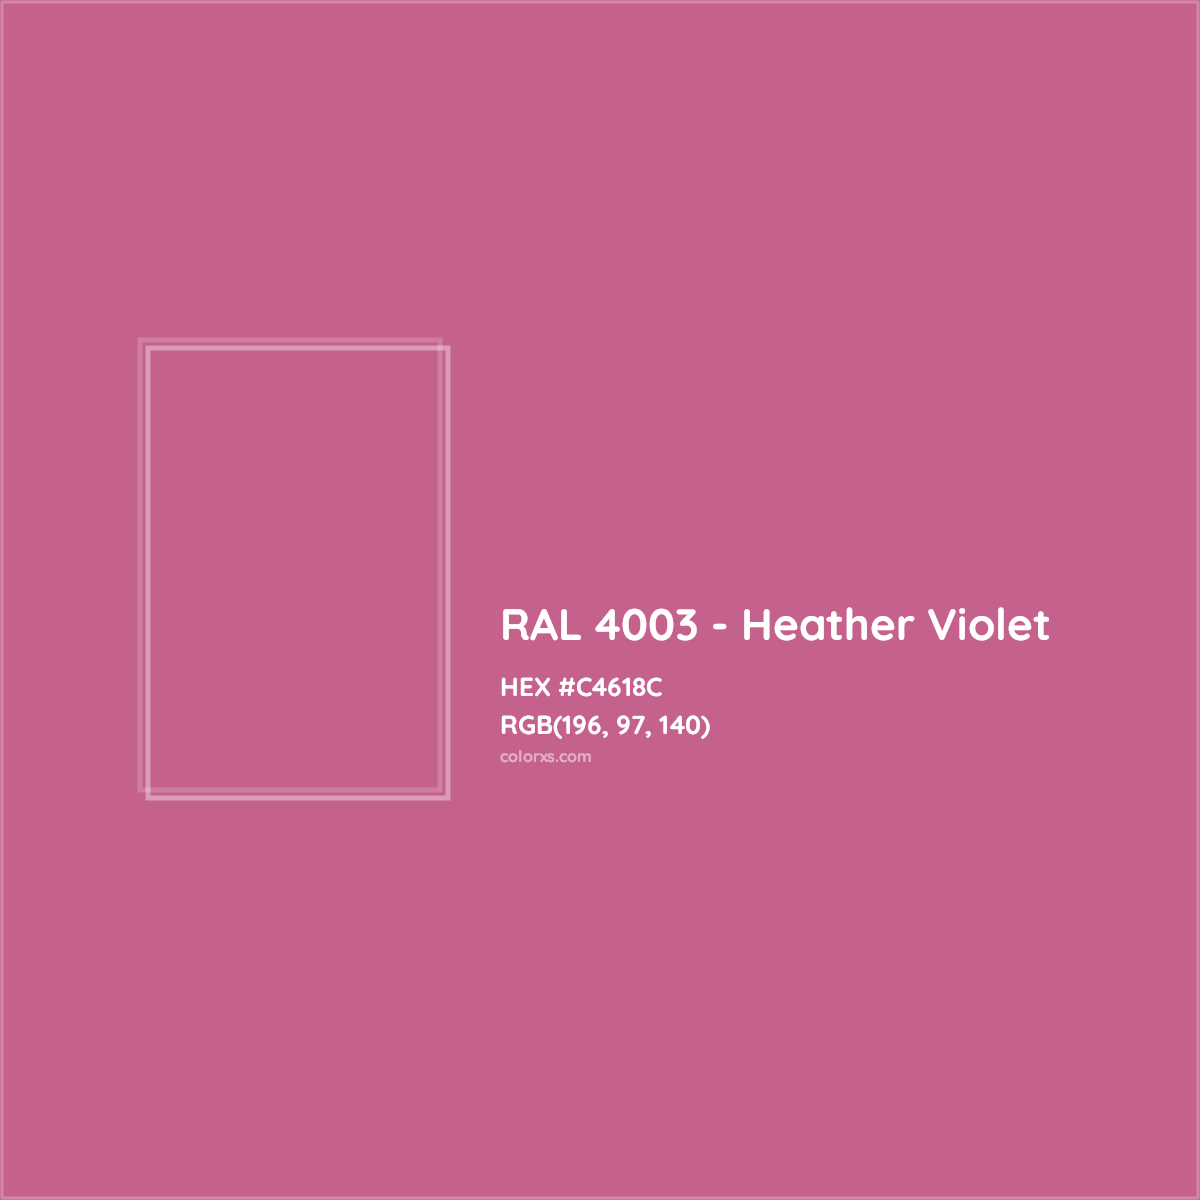 HEX #C4618C RAL 4003 - Heather Violet CMS RAL Classic - Color Code